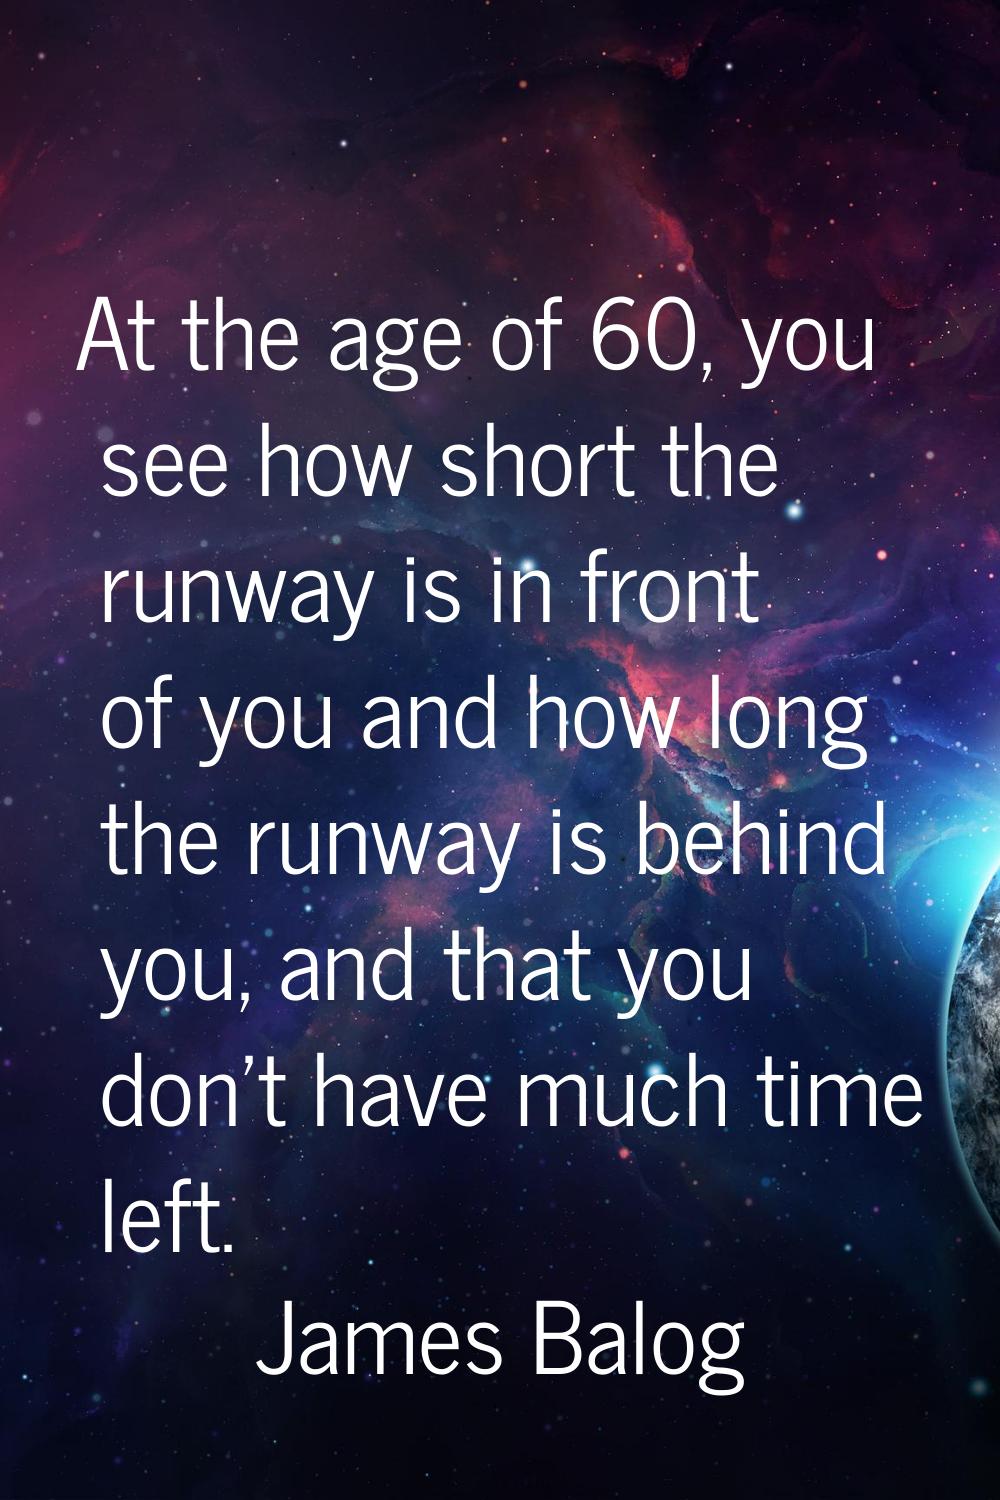 At the age of 60, you see how short the runway is in front of you and how long the runway is behind